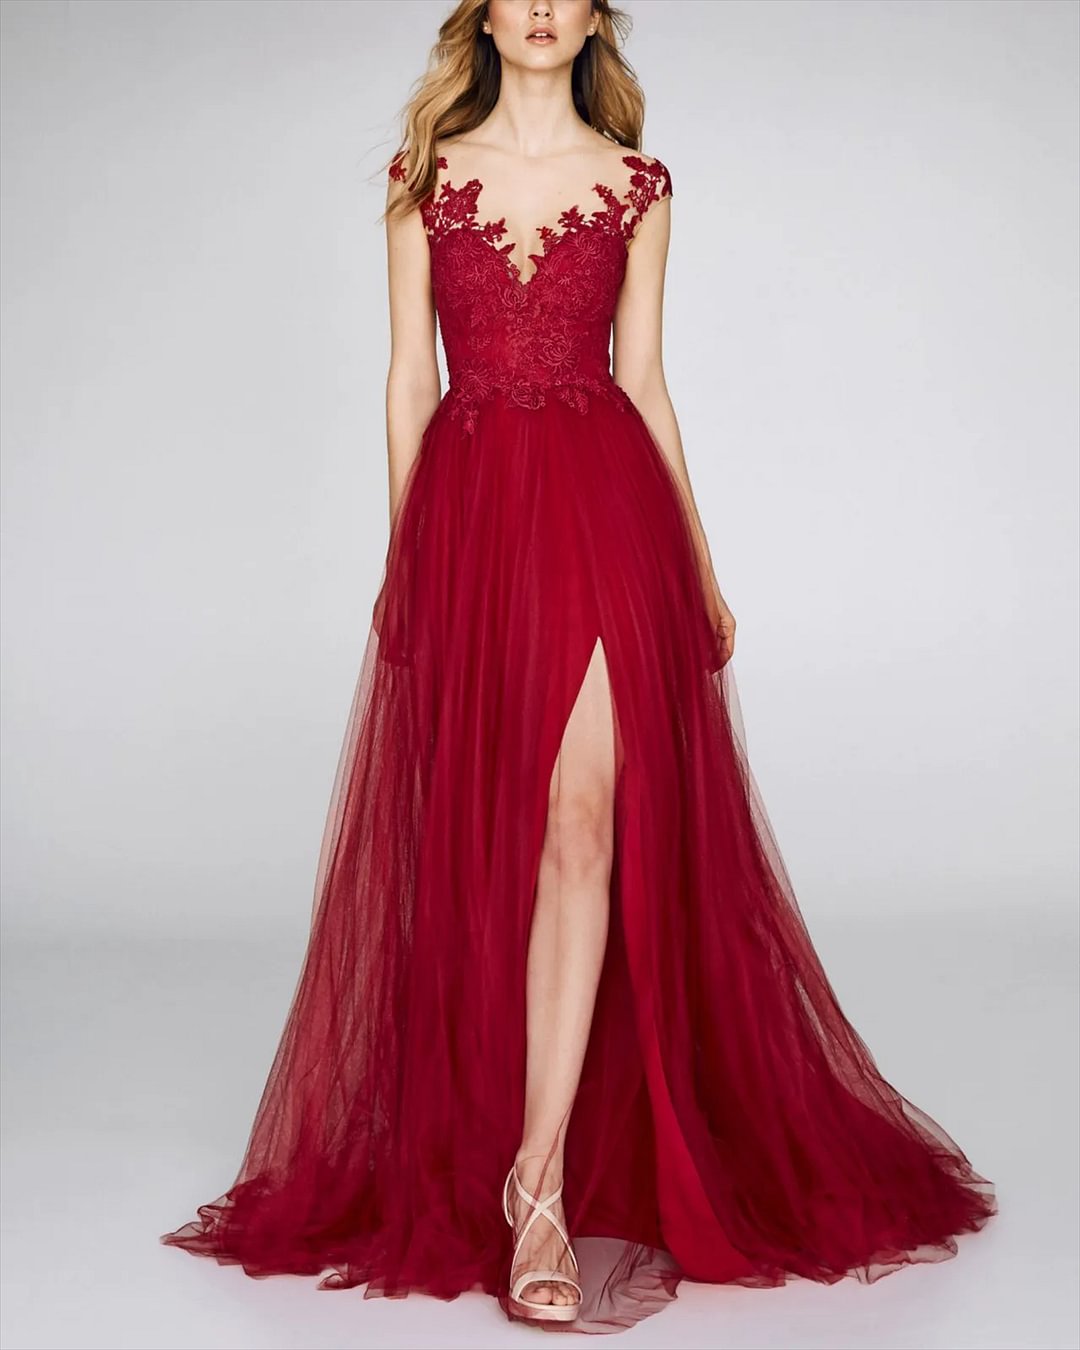 Women's Embroidery Prom Dress